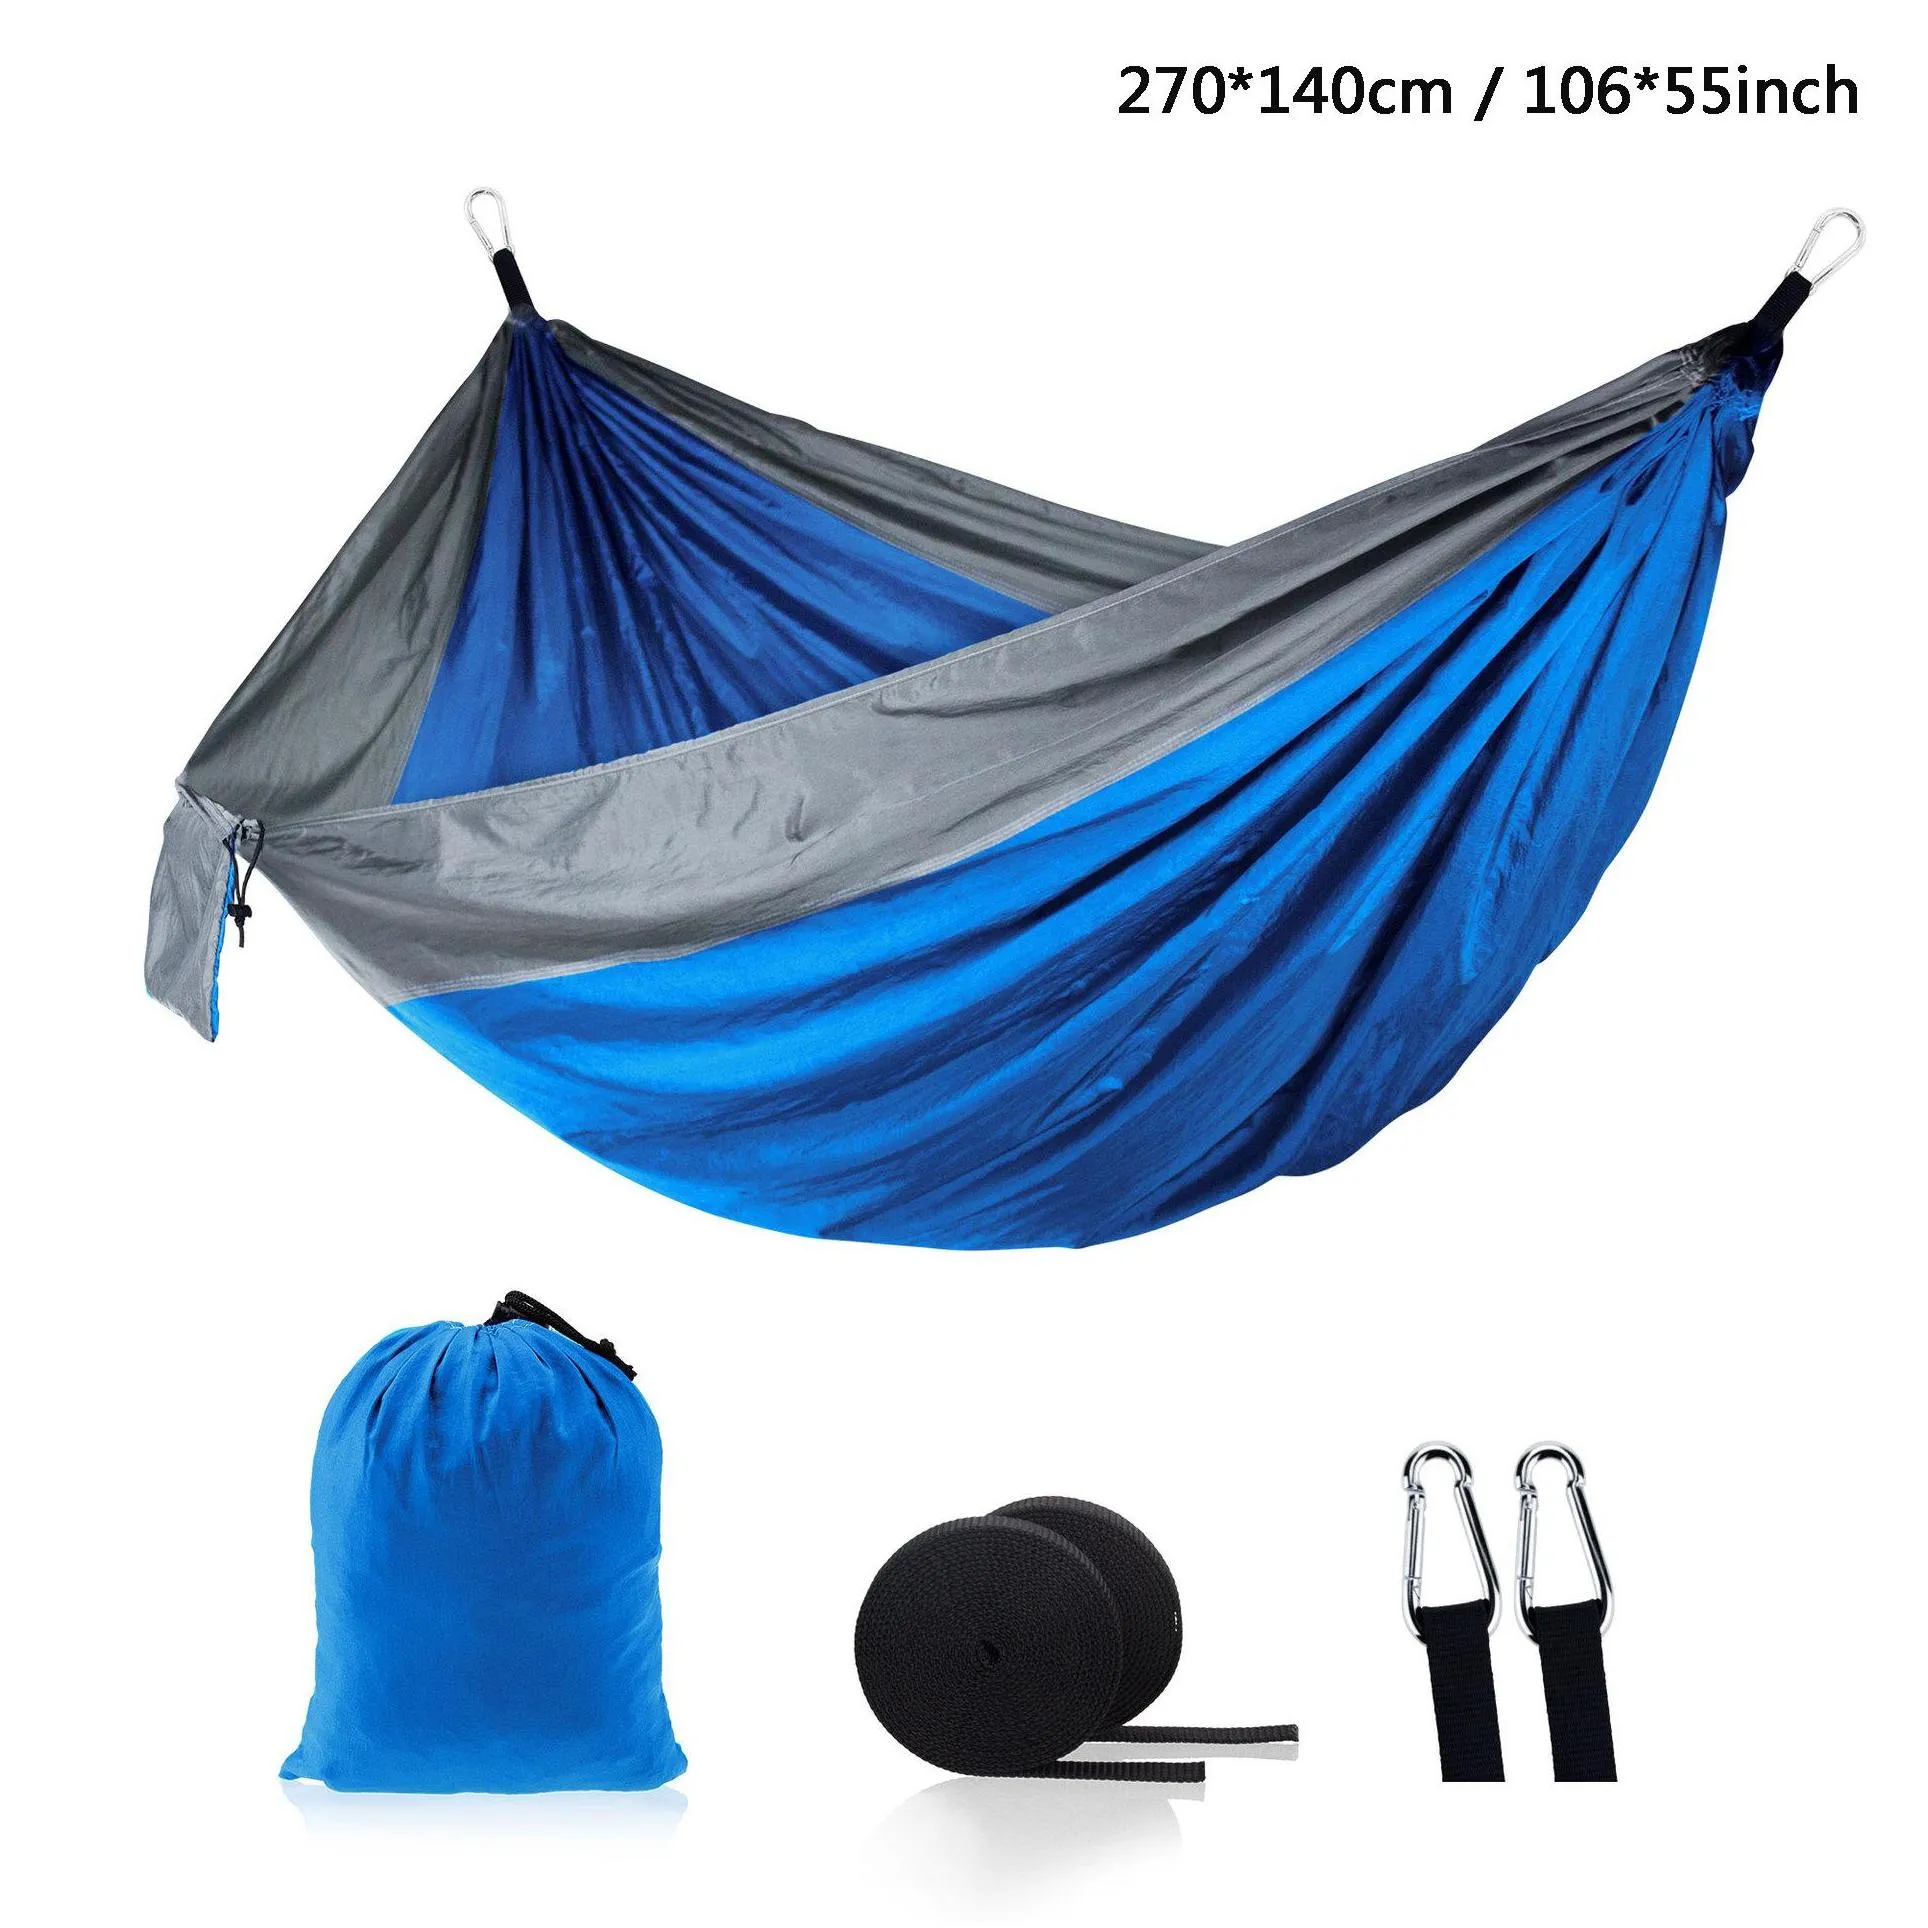 106x55inch outdoor parachute cloth hammock foldable field camping swing hanging bed nylon hammock with rope carabiners 44 colors dbc